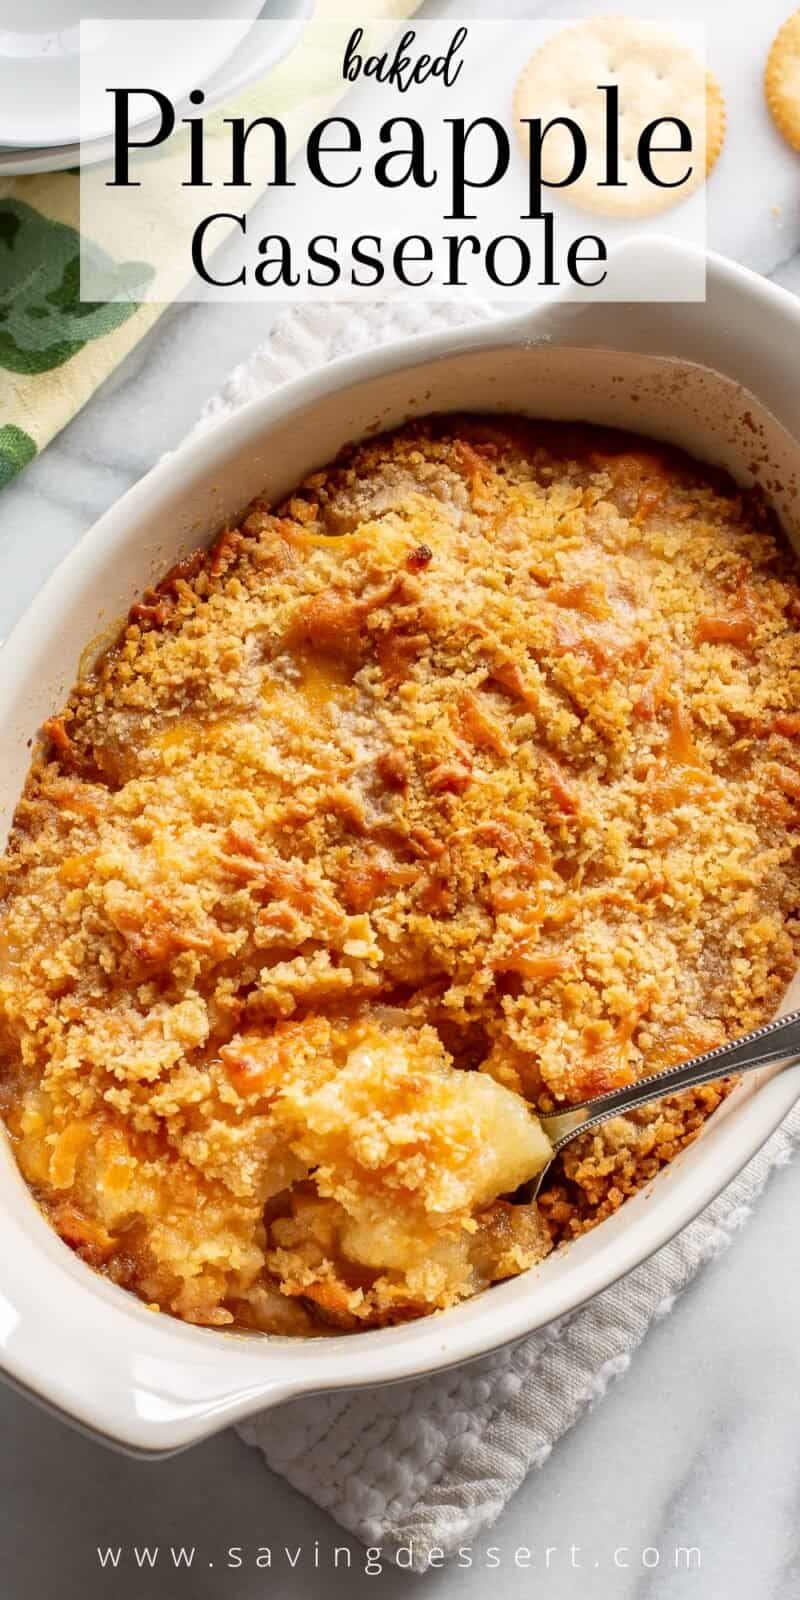 A casserole dish filled with hot baked pineapple casserole with crushed Ritz crackers on top